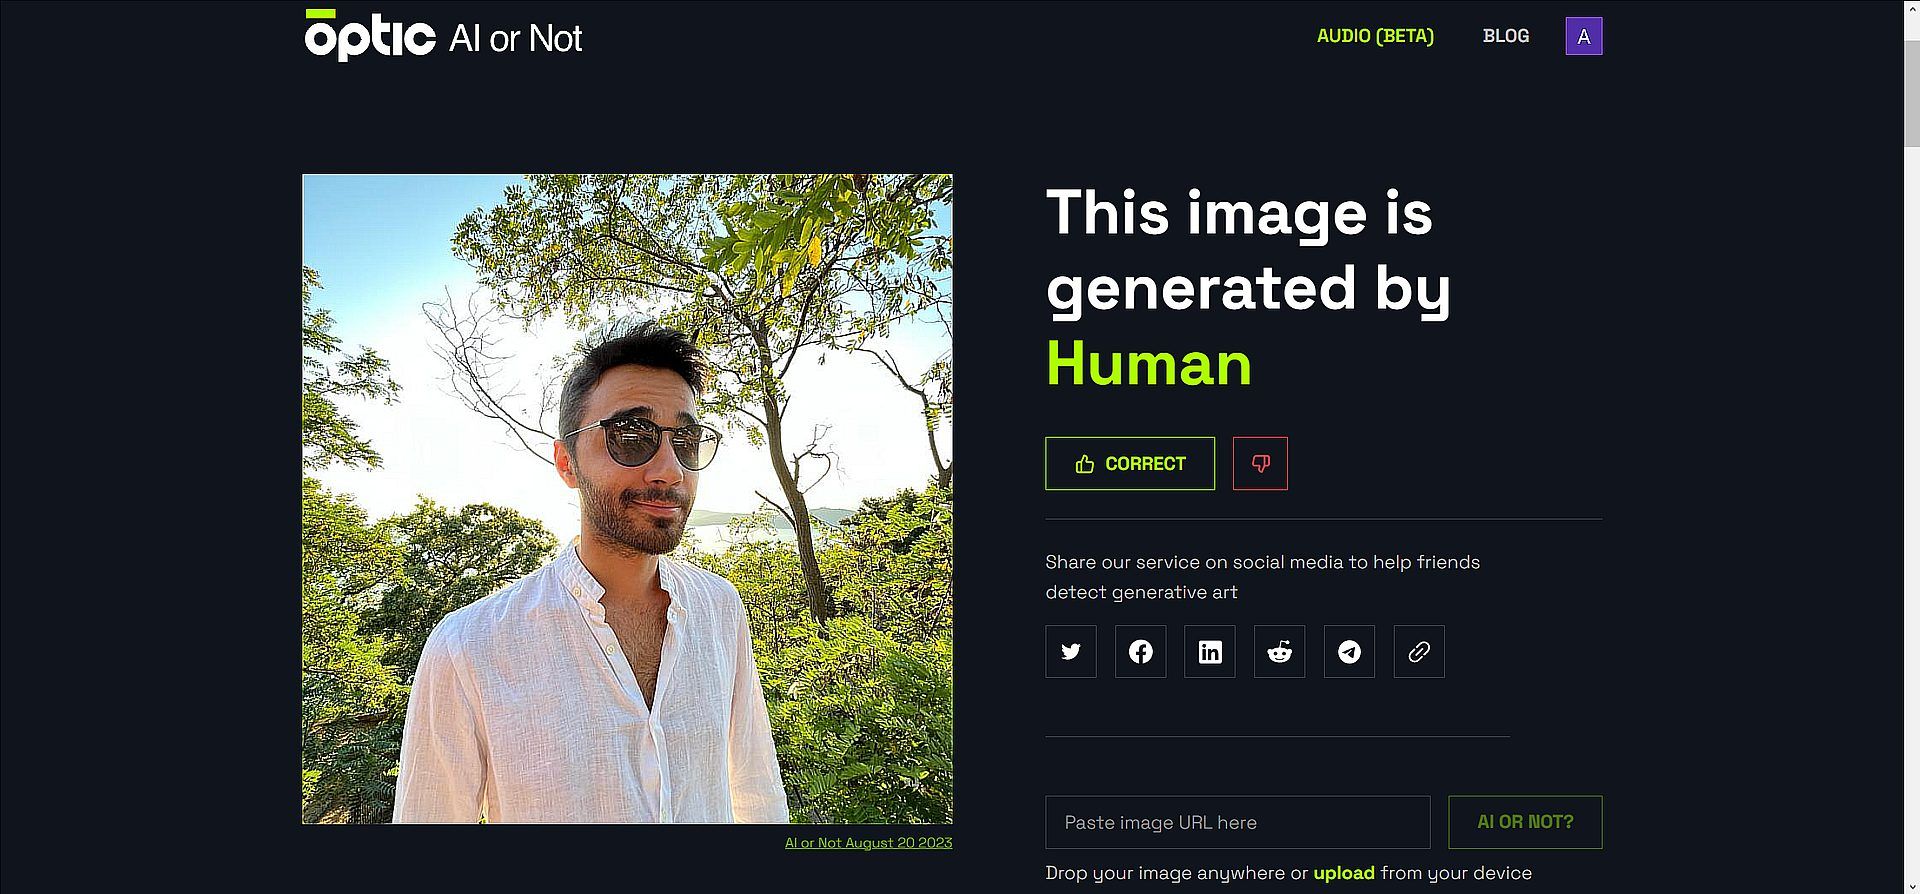 Optic AI or Not: Unmasking AI-generated images - Accurate, fast, transparent. Identify AI models with ease. Keep reading and explore now!